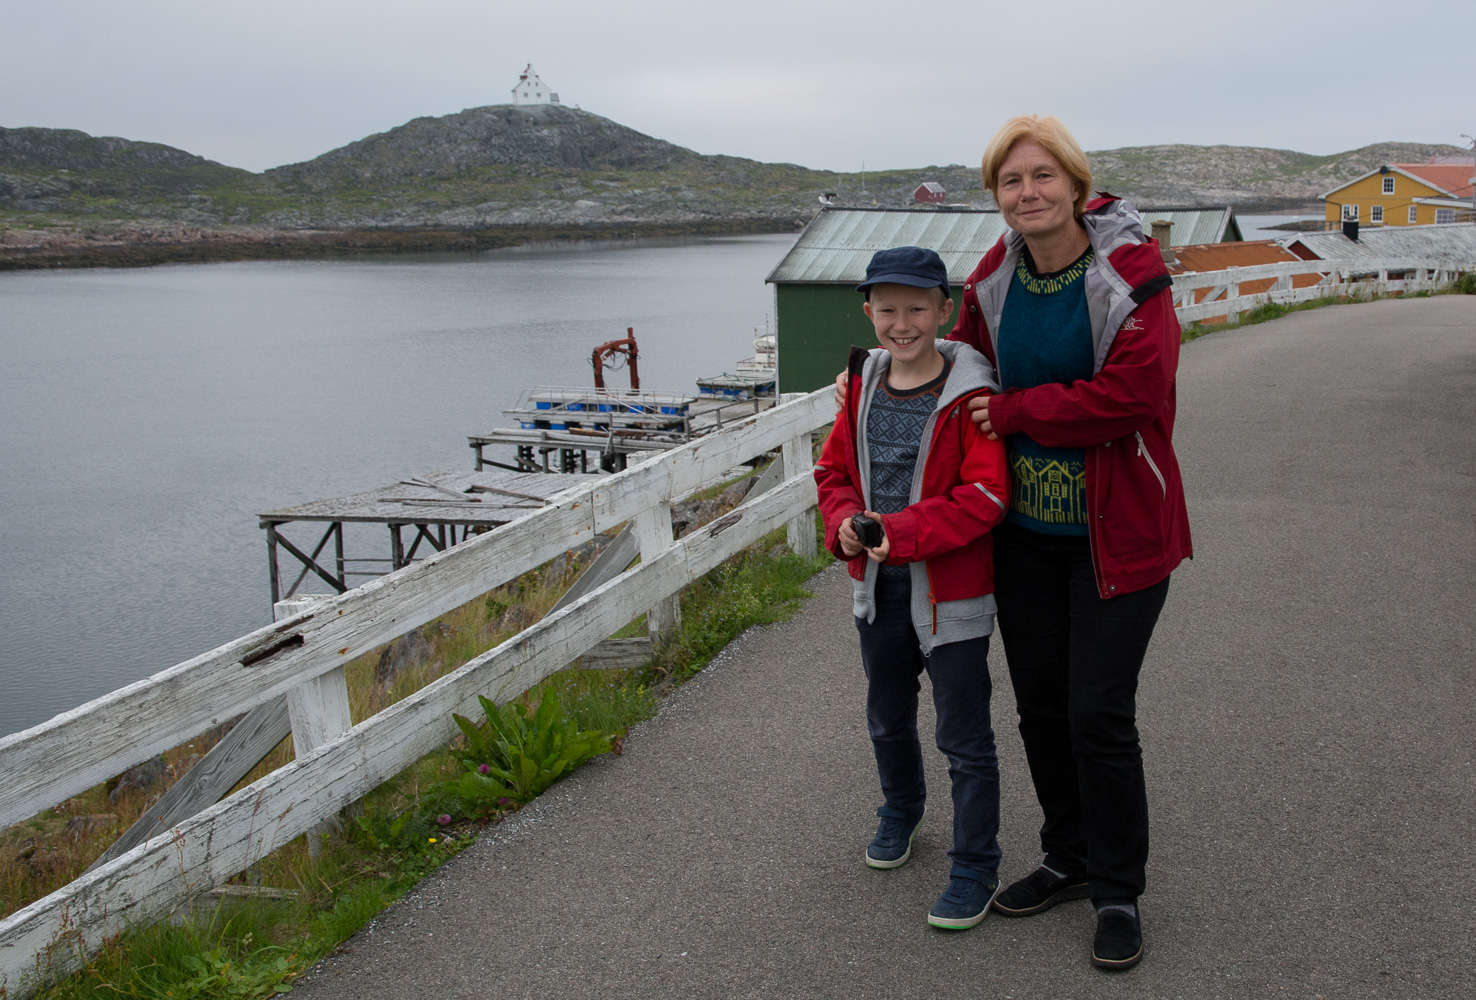 Sommerferie i Nordland juli 2020 // Summer holiday in Northern Norway